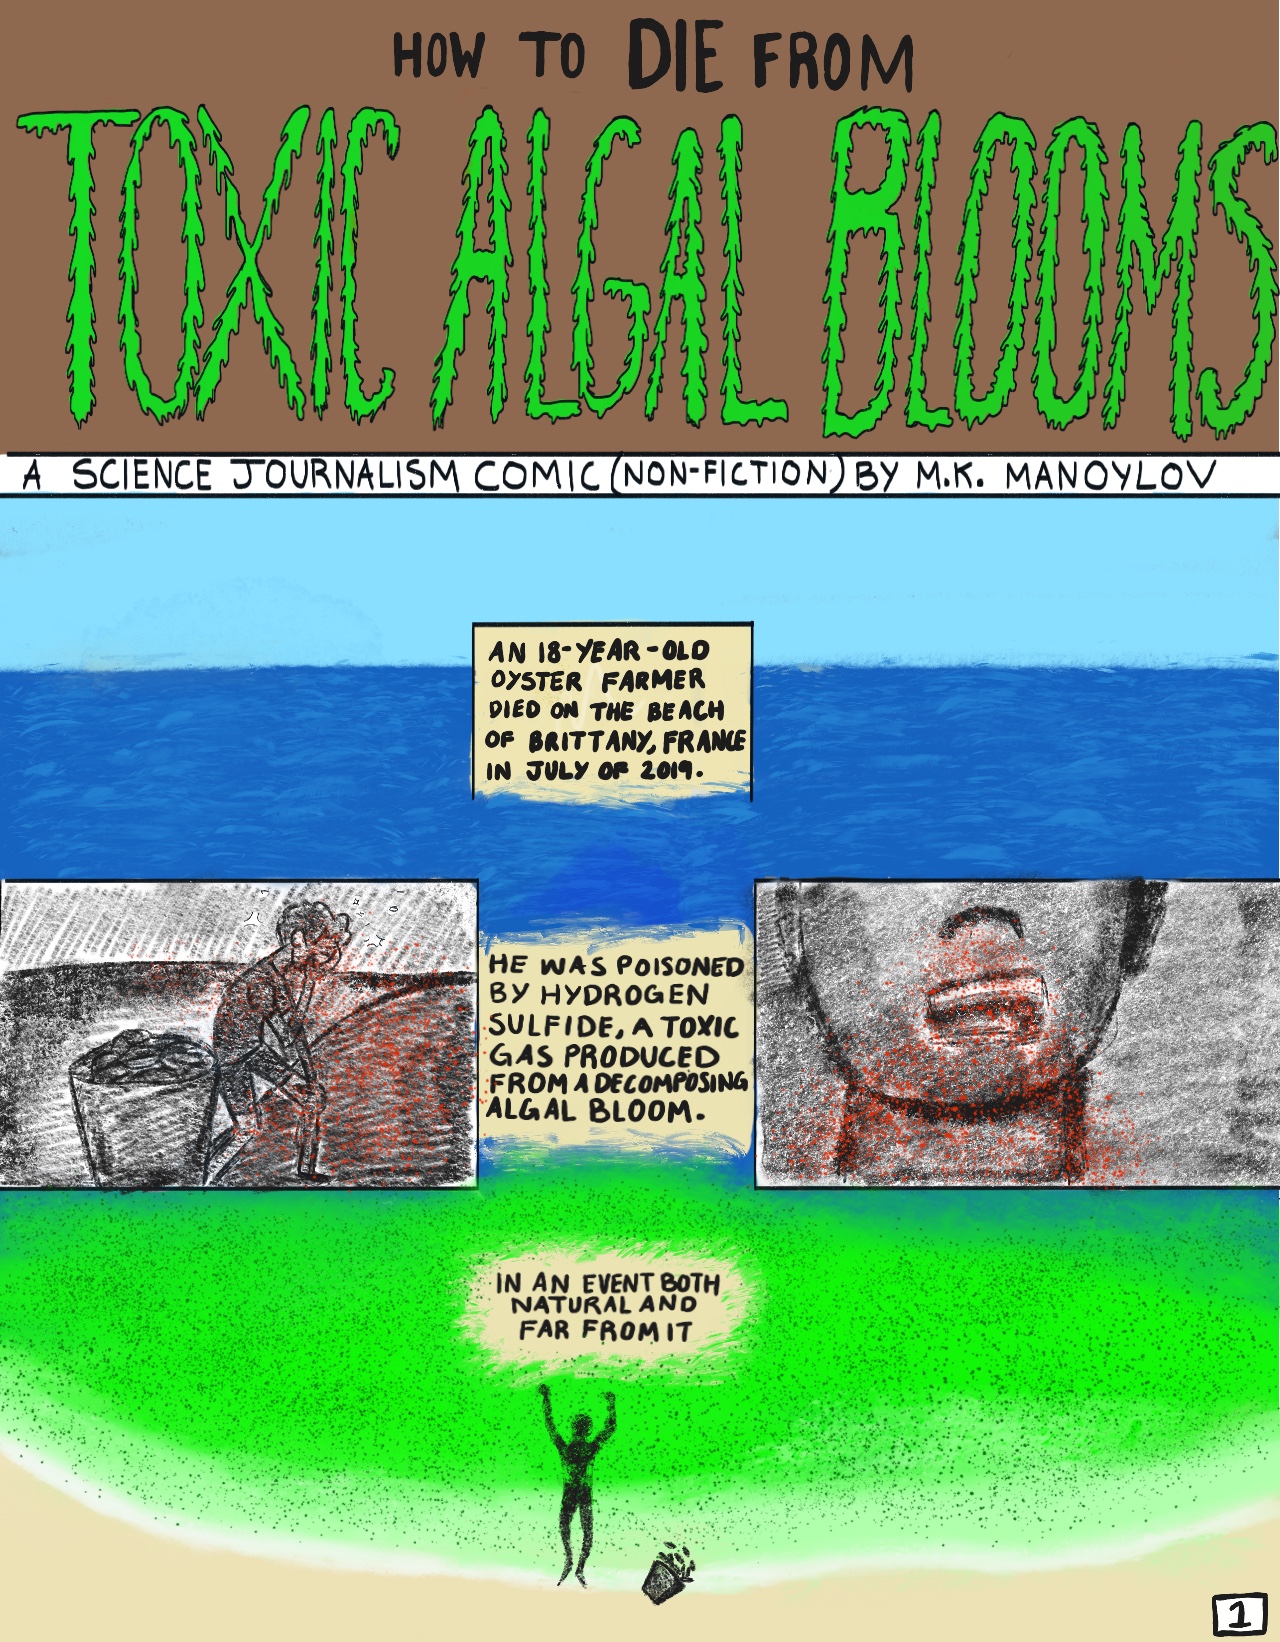 The title card for the comic. The top looks like a 50s horror comic. The page explains that an 18-year-old oyster farmer died after breathing in the toxic gas produced from a toxic algal bloom. 